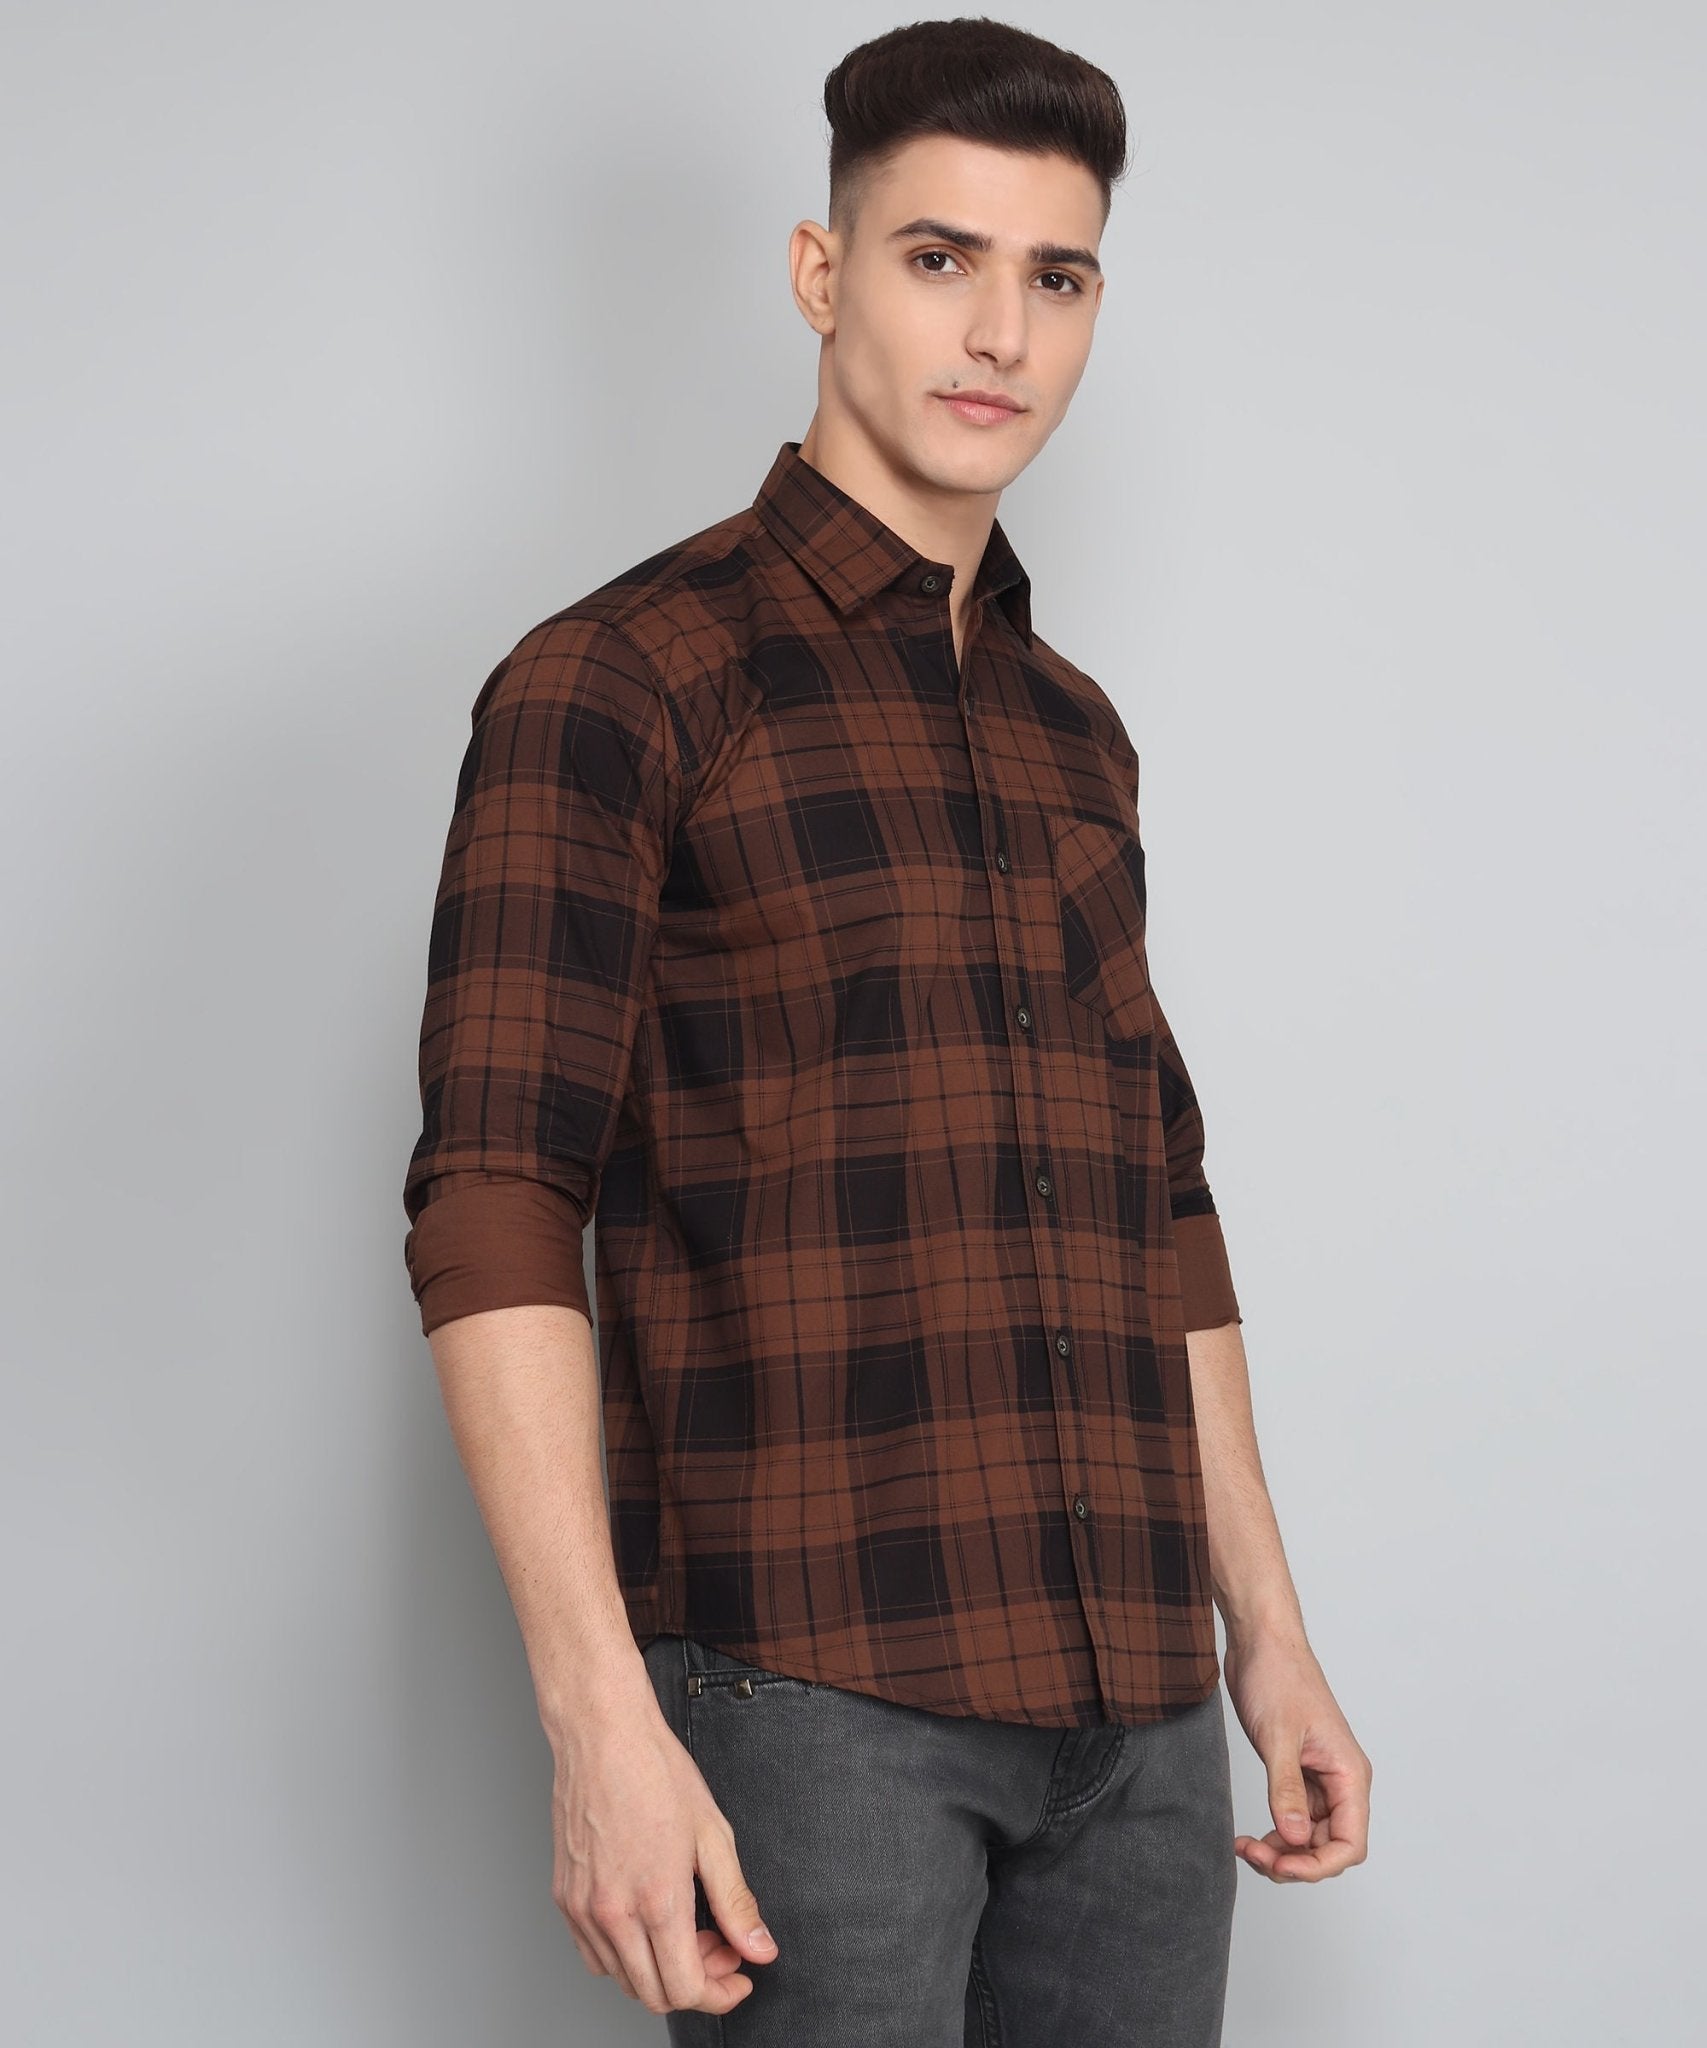 TryBuy Premium Exclusive Brown Black Cotton Casual Checks Shirt for Men - TryBuy® USA🇺🇸